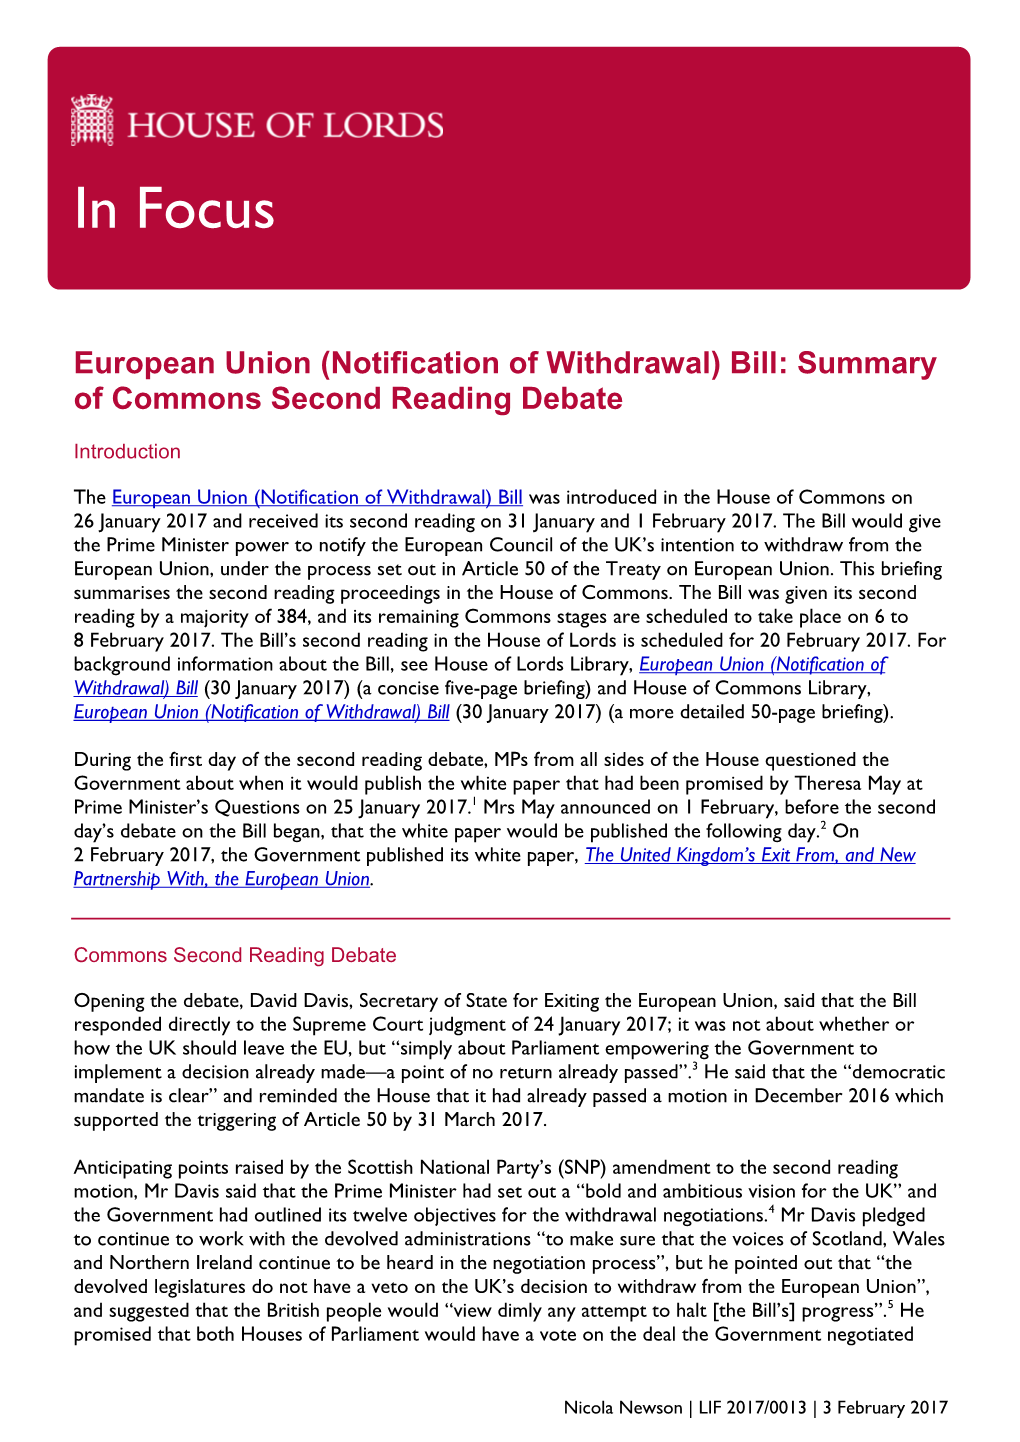 European Union (Notification of Withdrawal) Bill: Summary of Commons Second Reading Debate